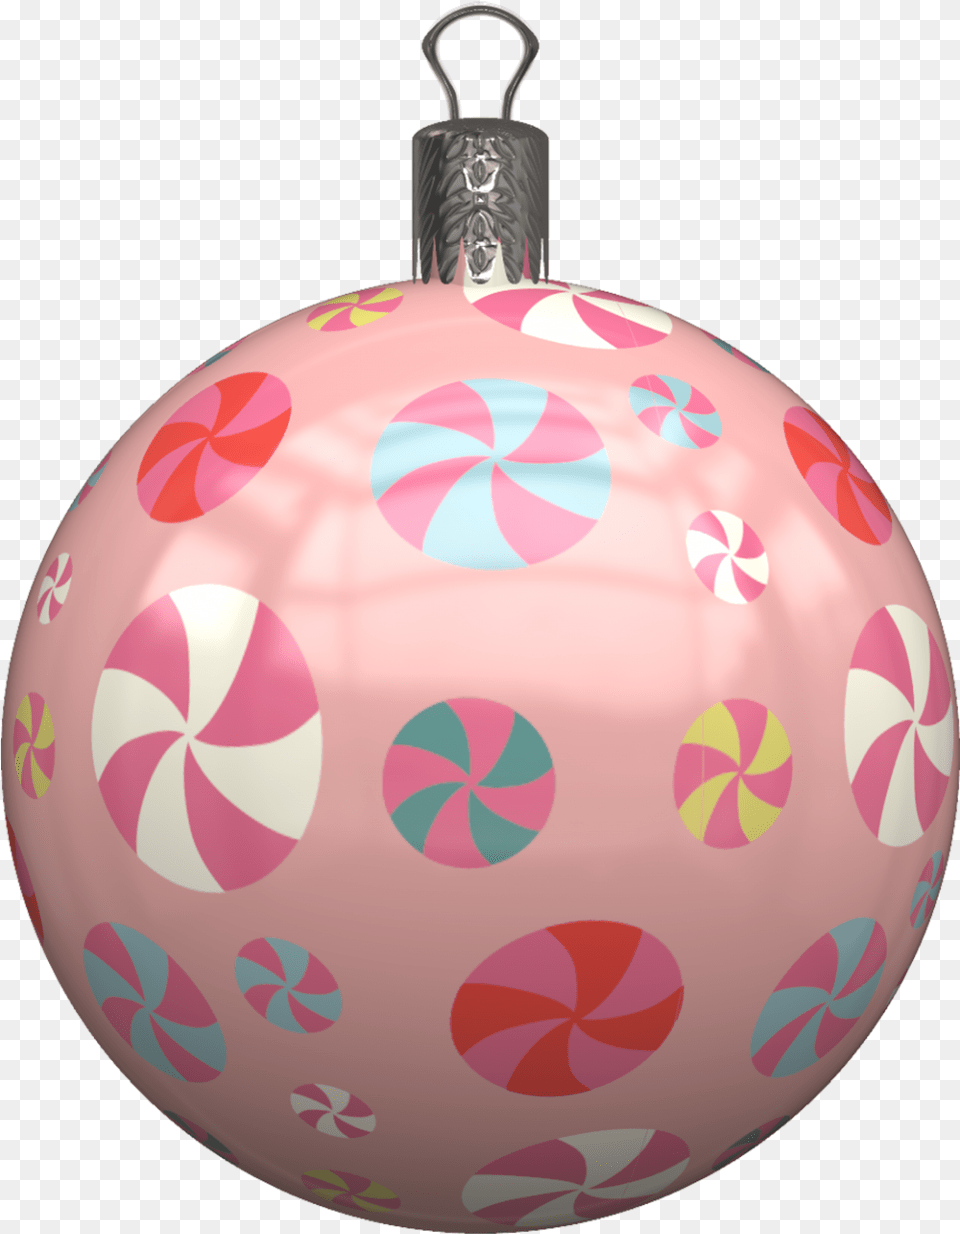 Peppermint Candy Ornament Christmas Ornament, Accessories, Lamp Free Transparent Png